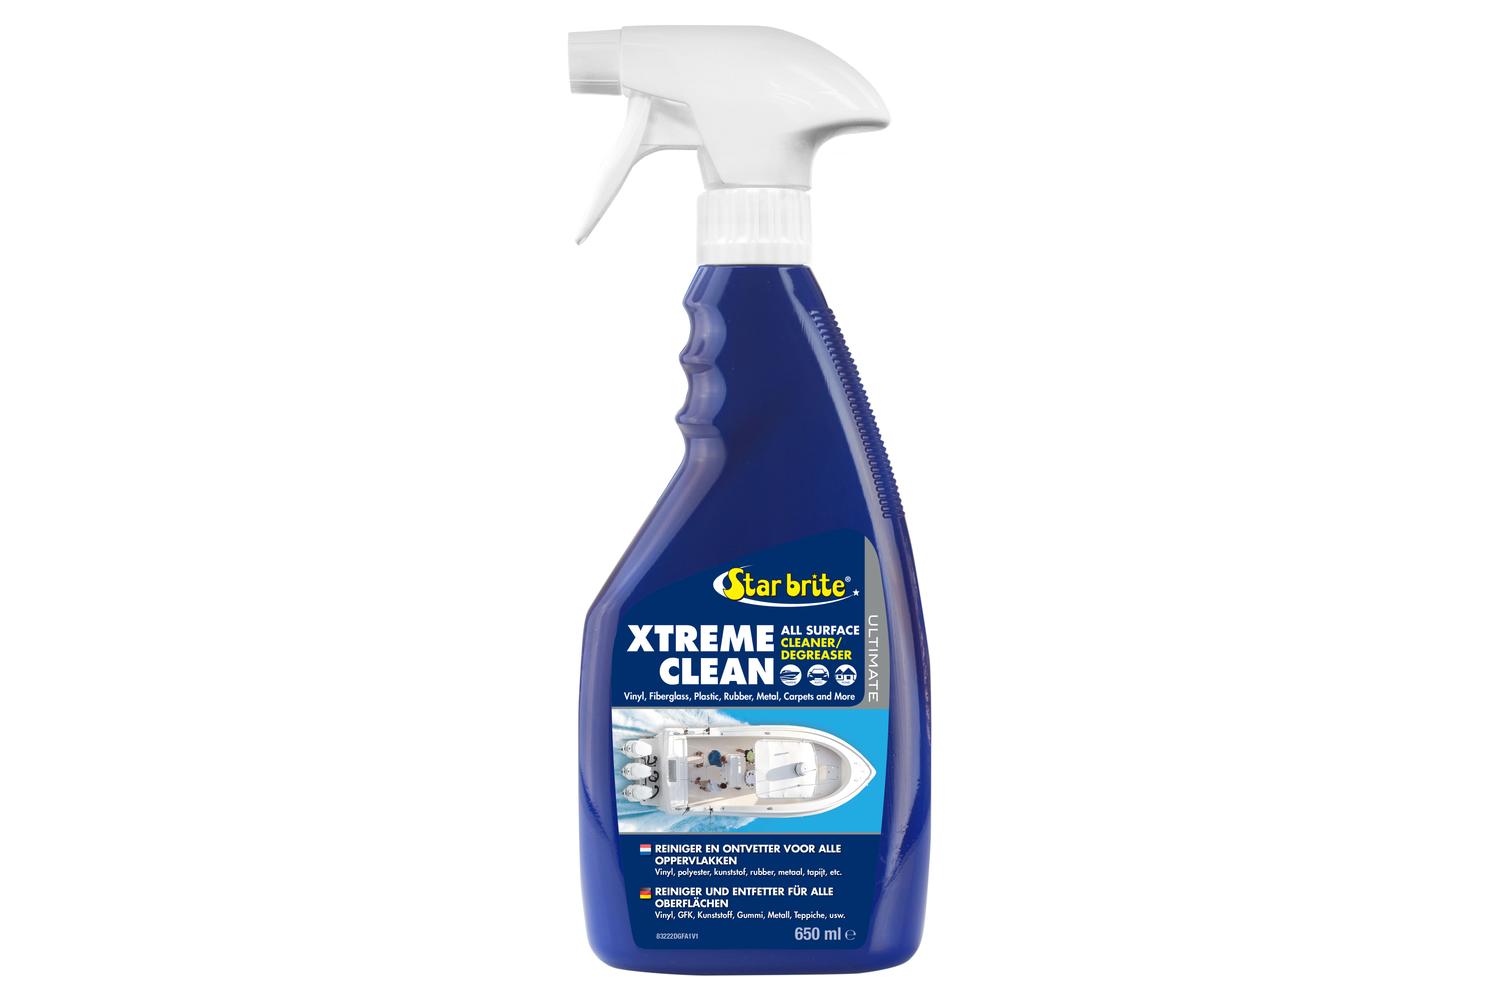 Starbrite Ultimate Xtreme Clean 650 ml